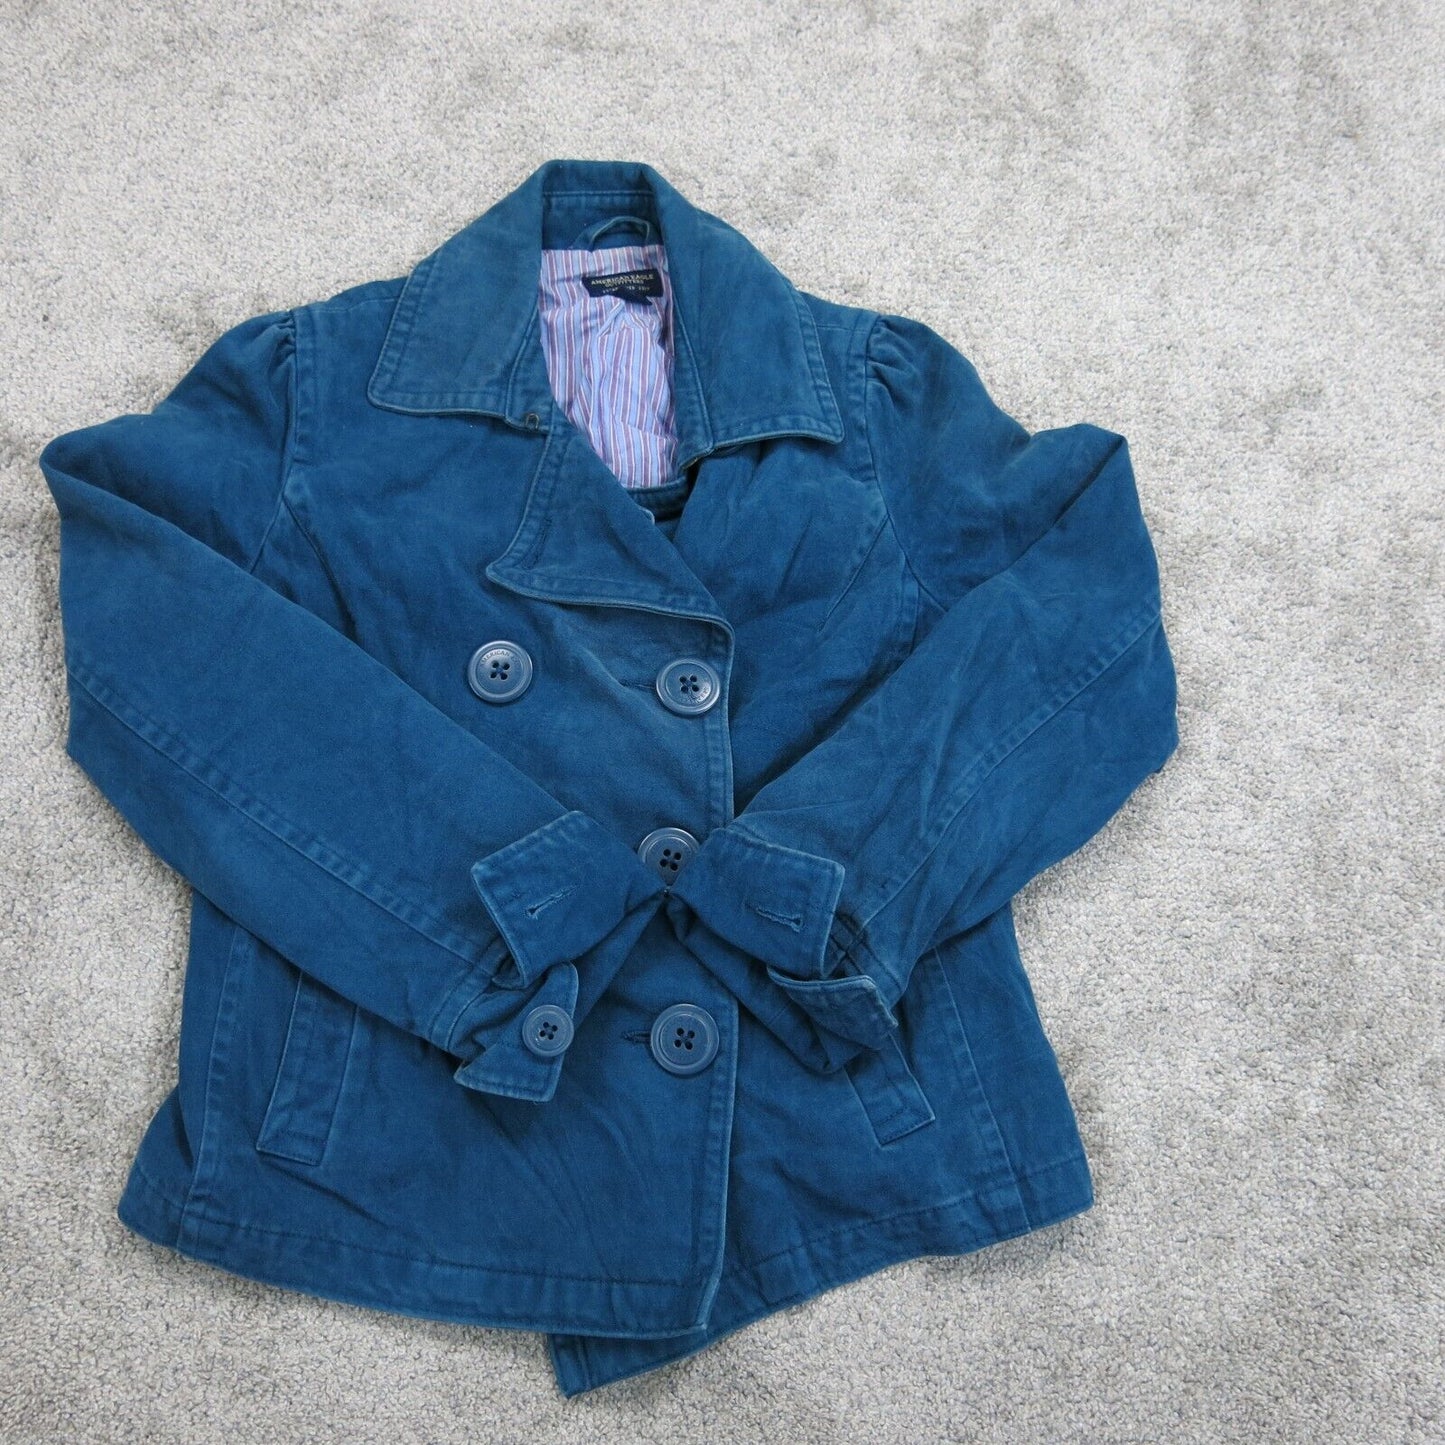 American Eagle Womens Outfitter Double Breasted Blazer Jacket Blue Size Medium